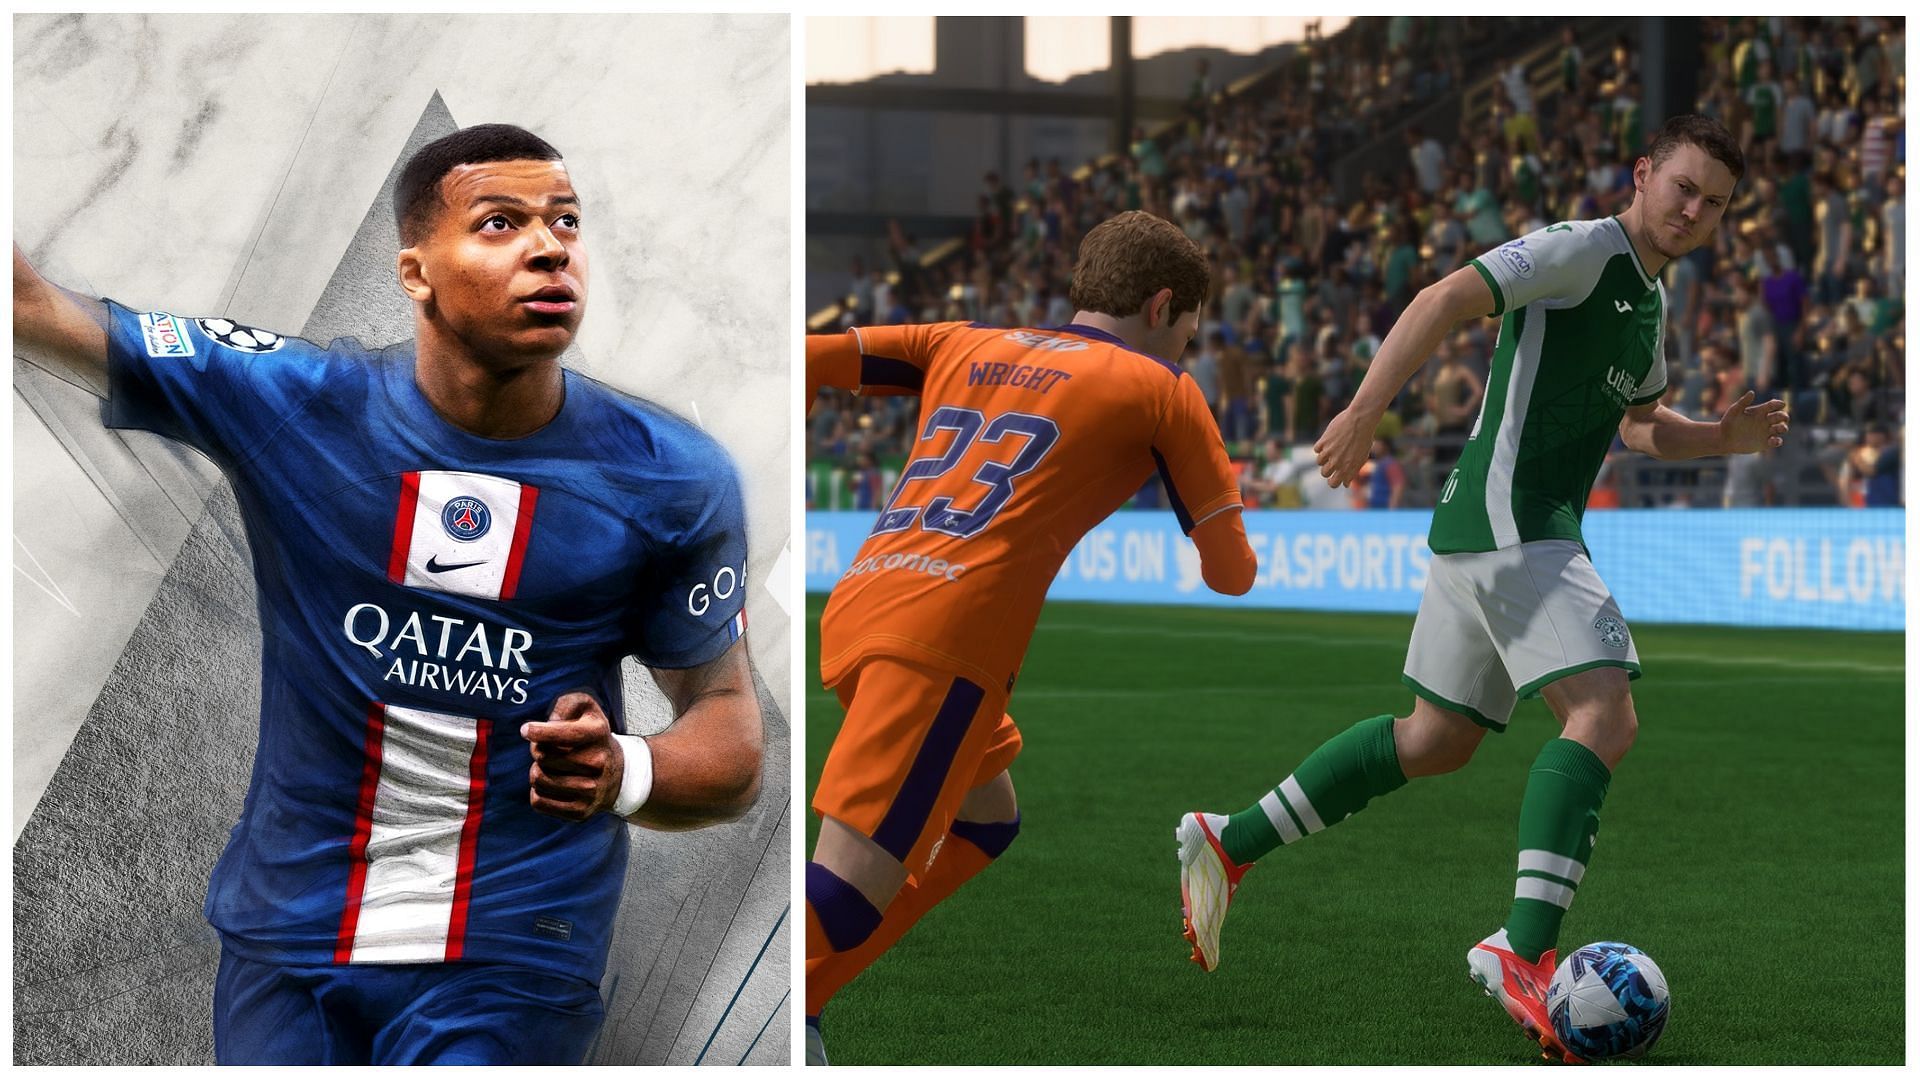 The McGeady Spin is extremely effective in FIFA 23 (Images via EA Sports)